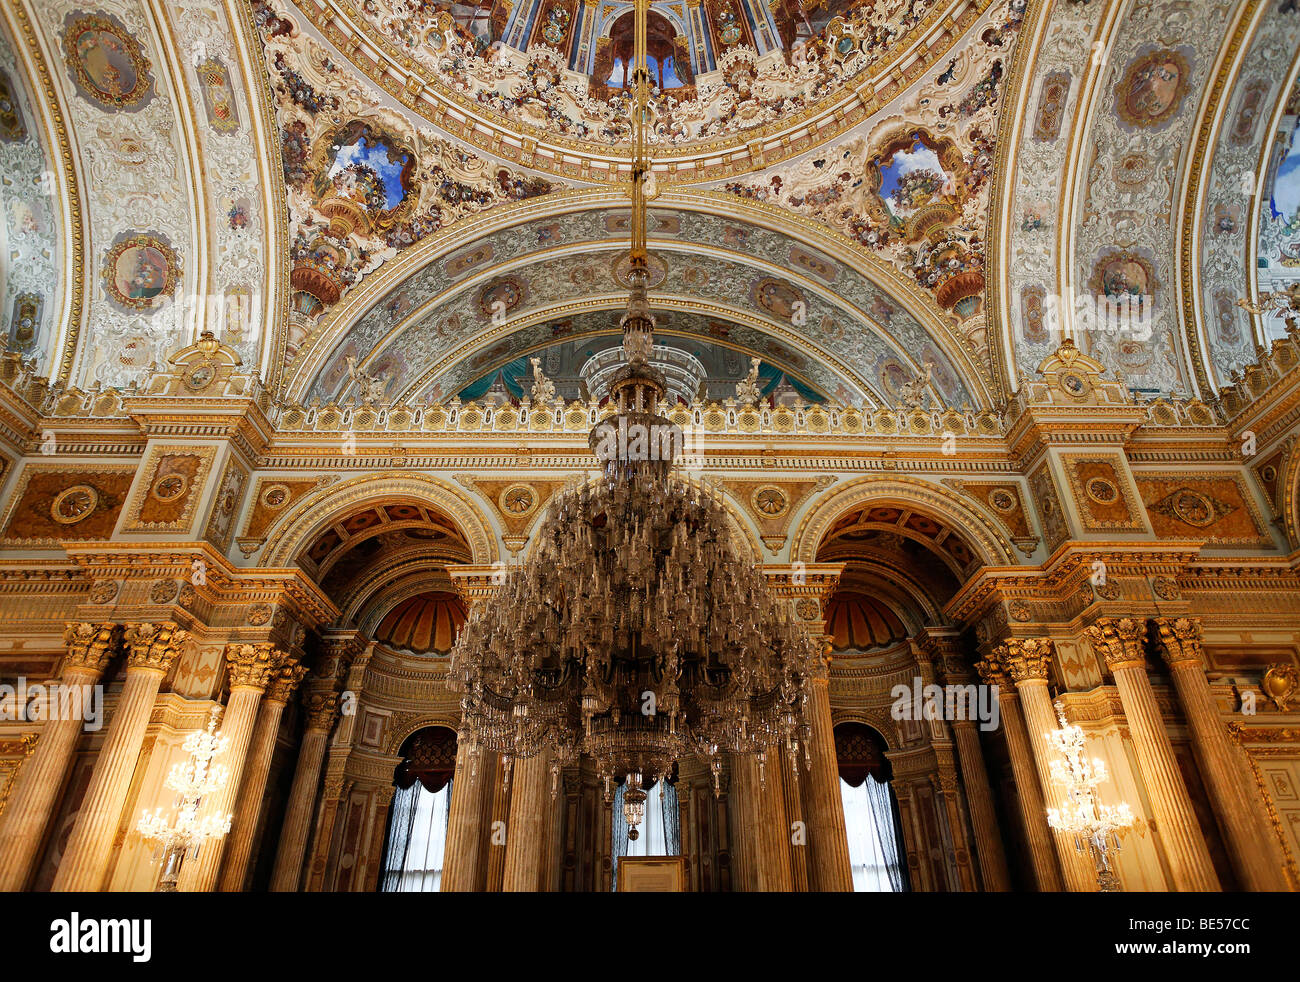 Ceremonial hall with enormous chandelier, Dolmabahce Palace, Sultan's palace from the 19 th century, Besiktas, Istanbul, Turkey Stock Photo